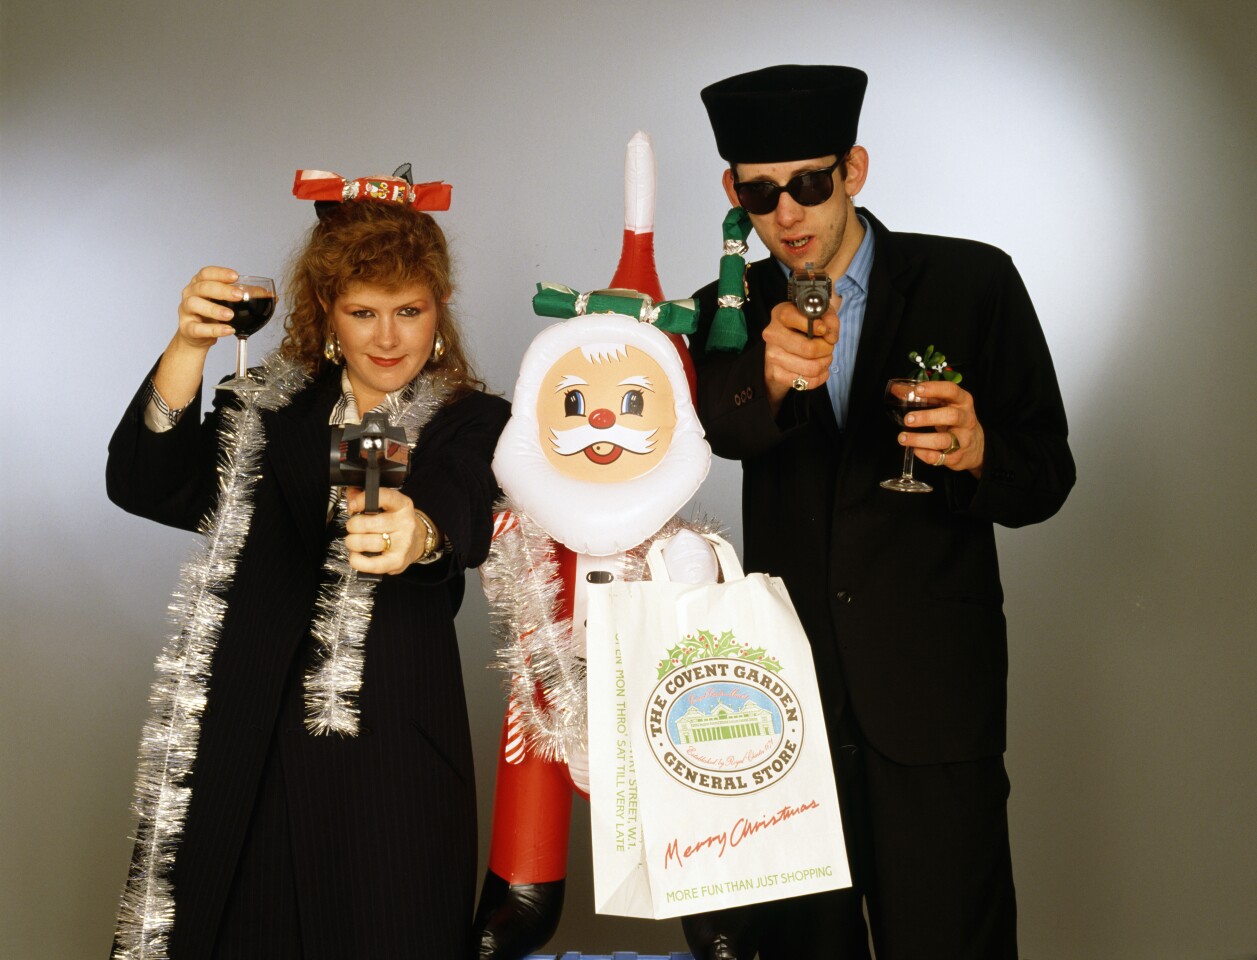 Singers Kirsty MacColl and Shane MacGowan with with toy guns and an inflatable Santa, 1987.